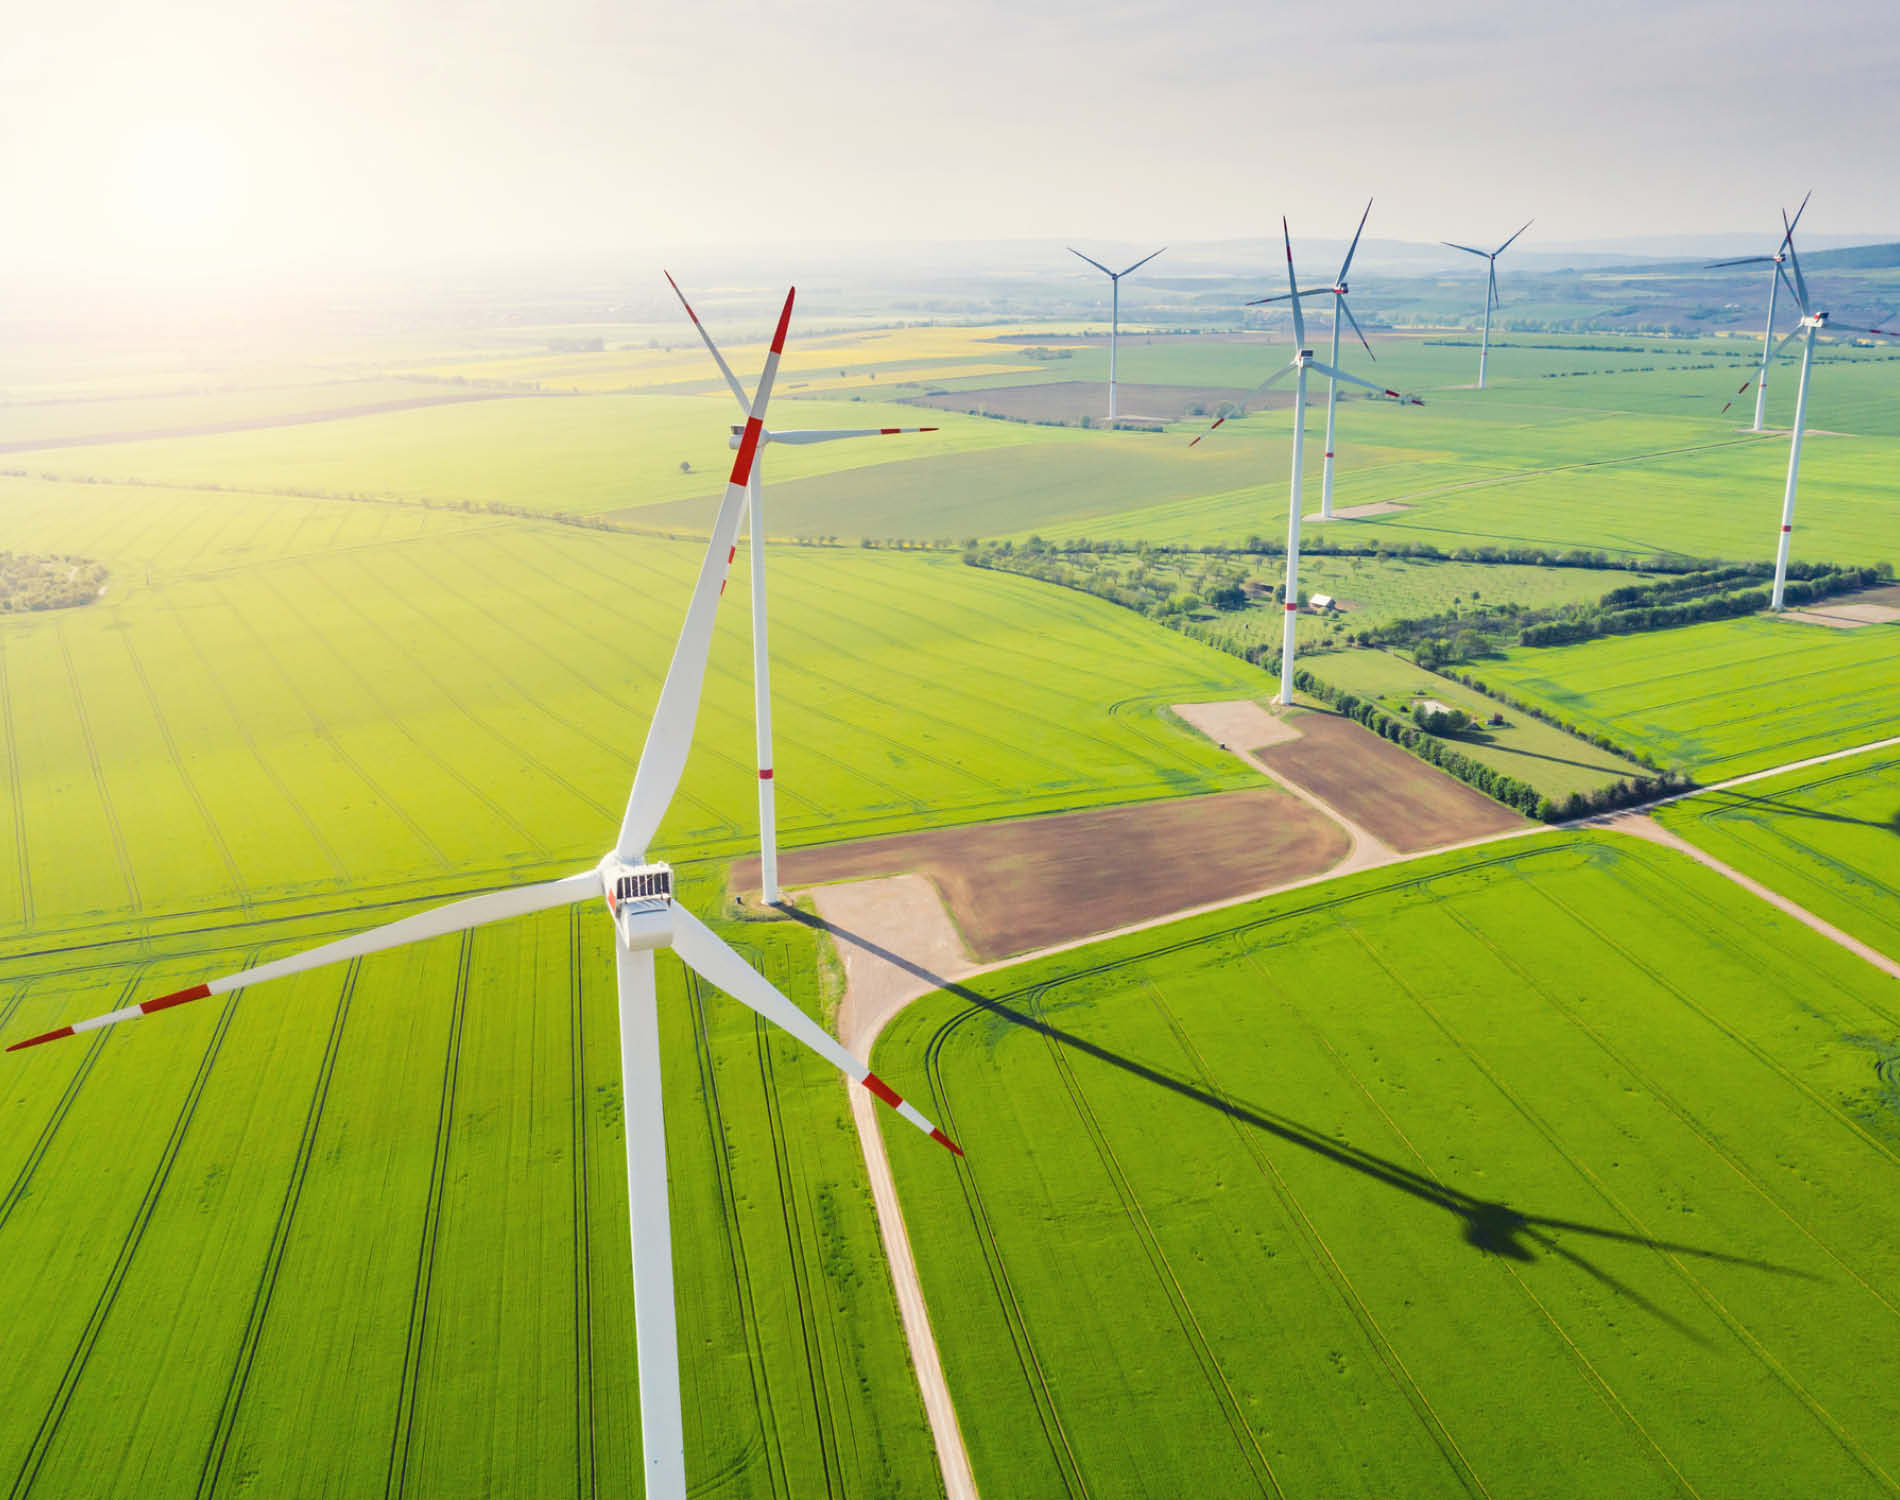 /-/media/images/website/background-images/industry-sectors/energy/energy_wind_istock-1224821300.ashx?sc_lang=pl-pl